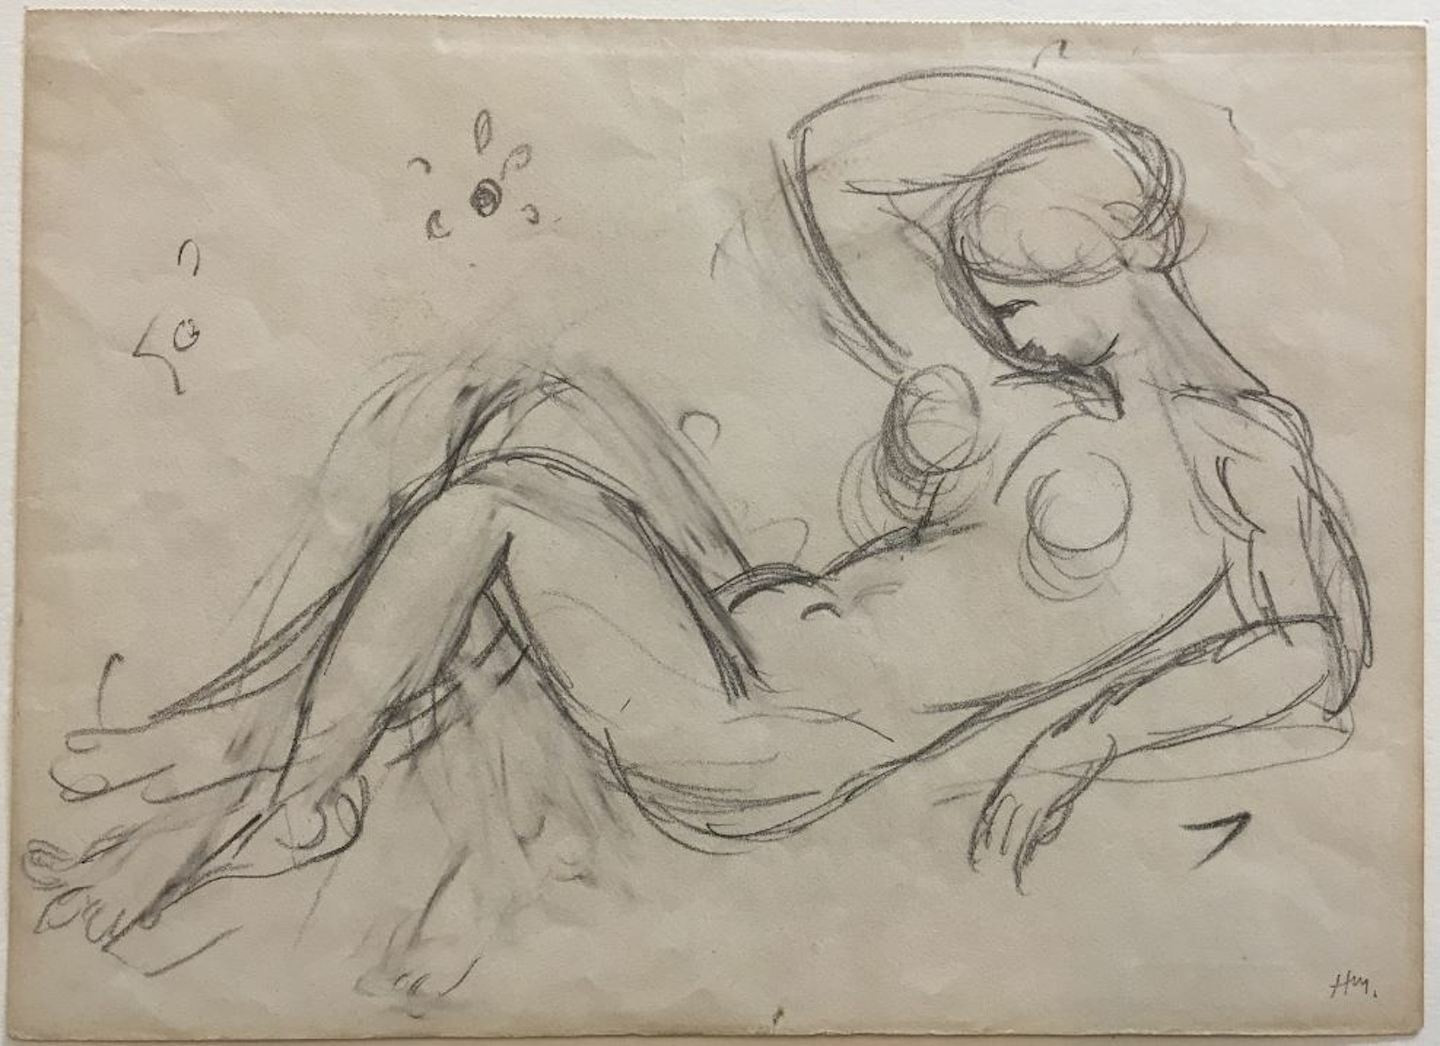 Henri Matisse. *Untitled (Study of Reclining Nude)*. 1911. Pencil on paper from sketchbook, 10 1/16 × 13 15/16” (25.5 × 35.4 cm). Musée National d’Art Moderne, Centre Pompidou, Paris. © 2022 Succession H. Matisse / Artists Rights Society (ARS), New York